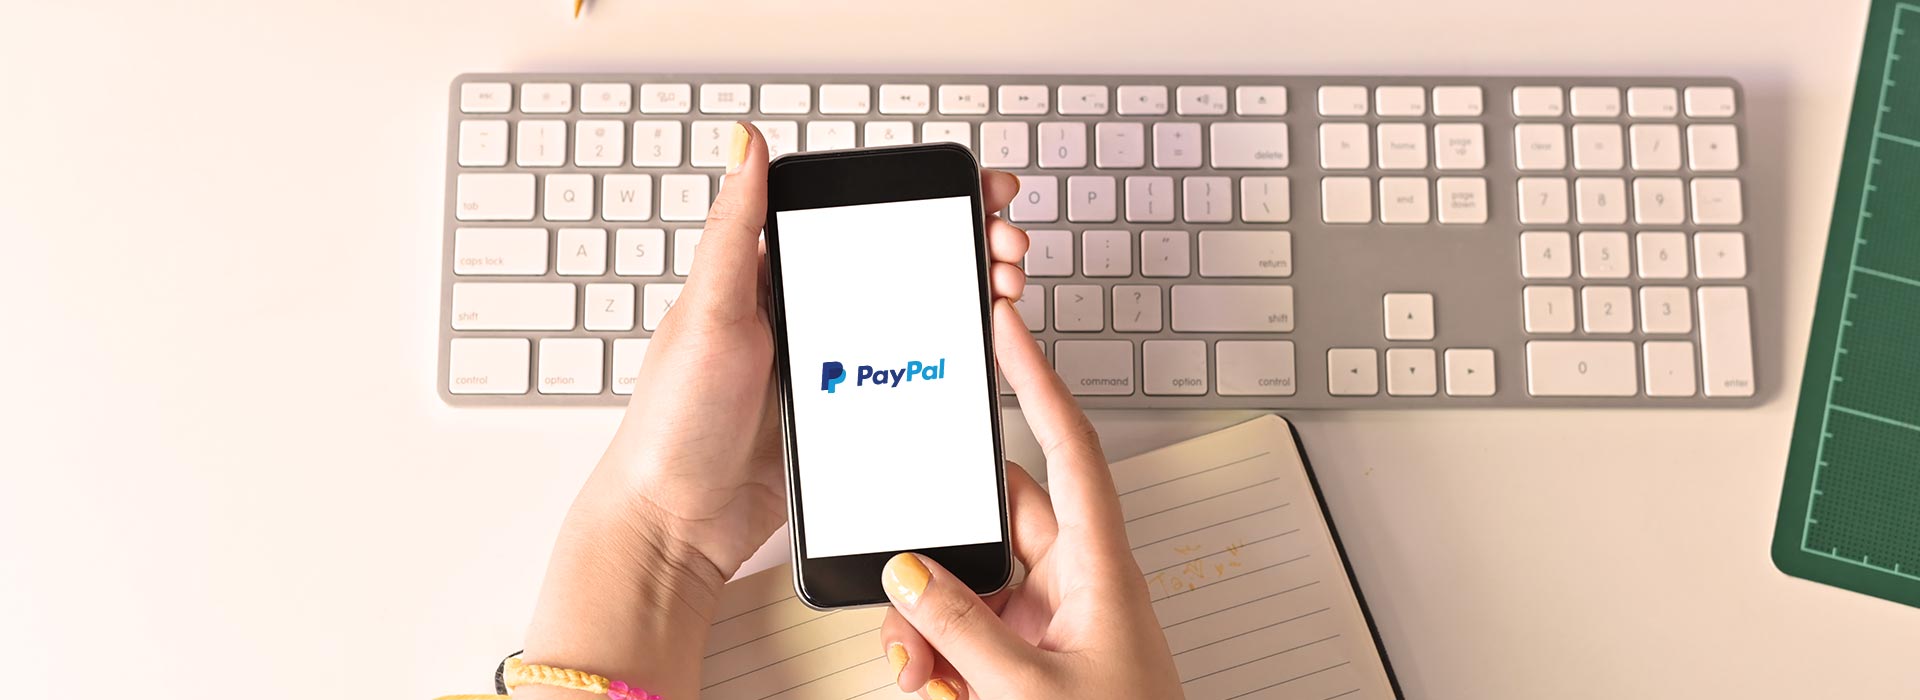 How does PayPal make money